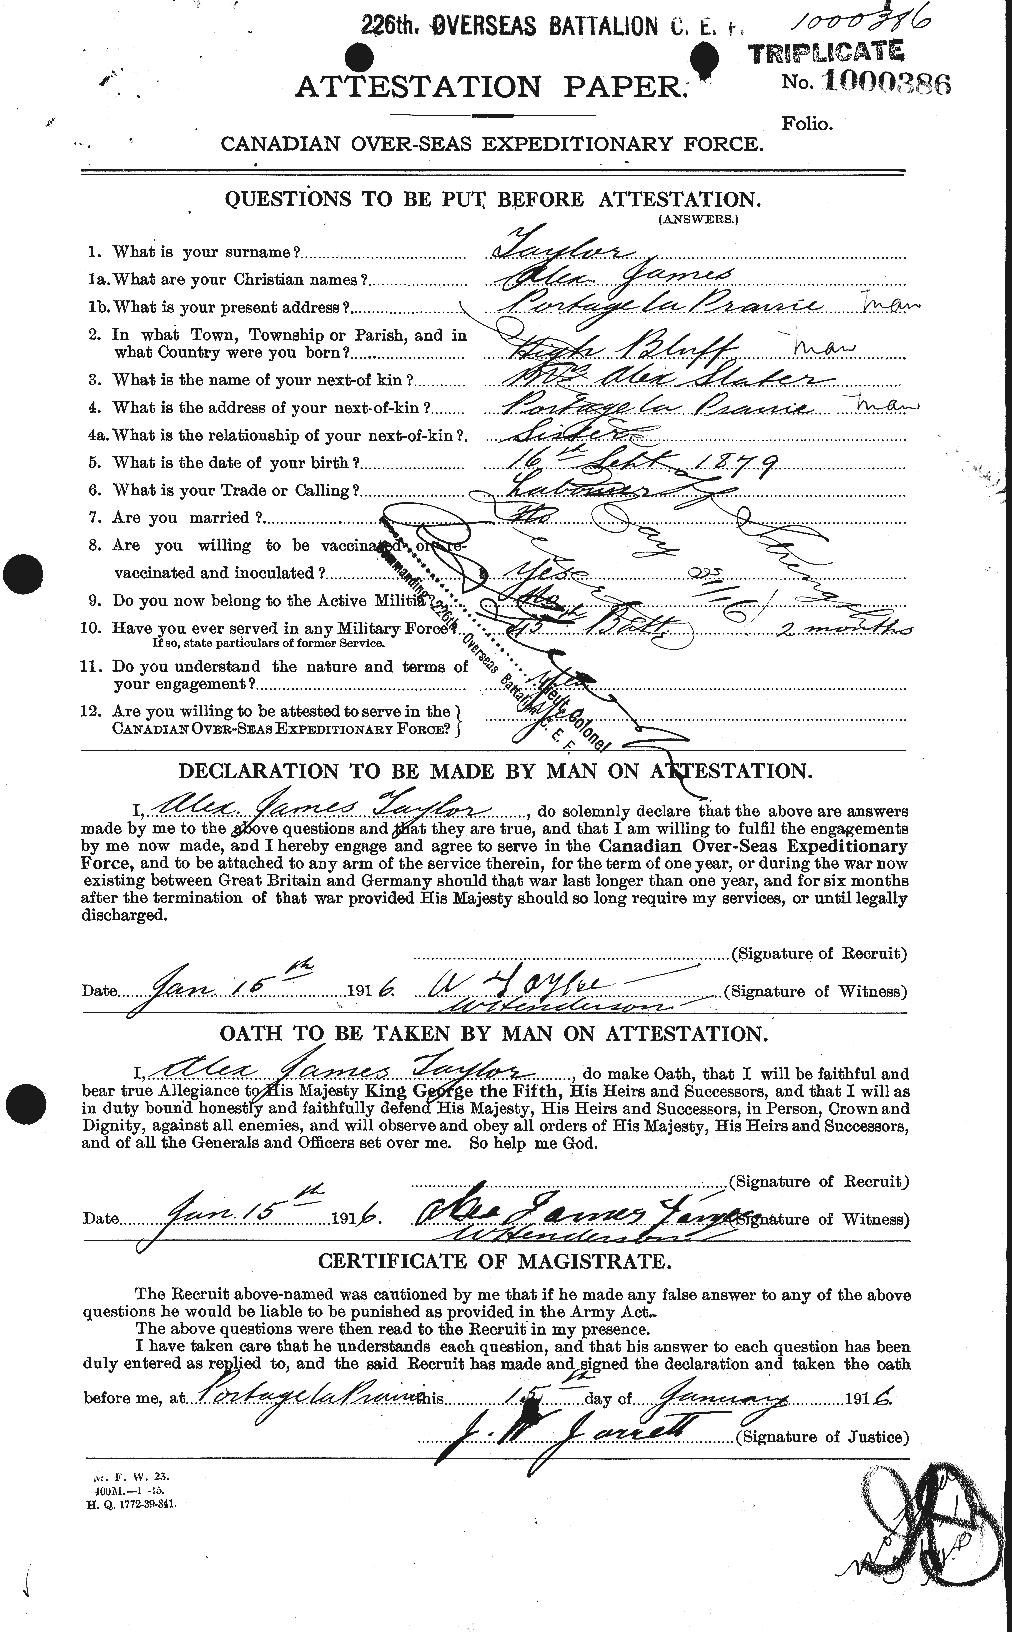 Personnel Records of the First World War - CEF 626135a